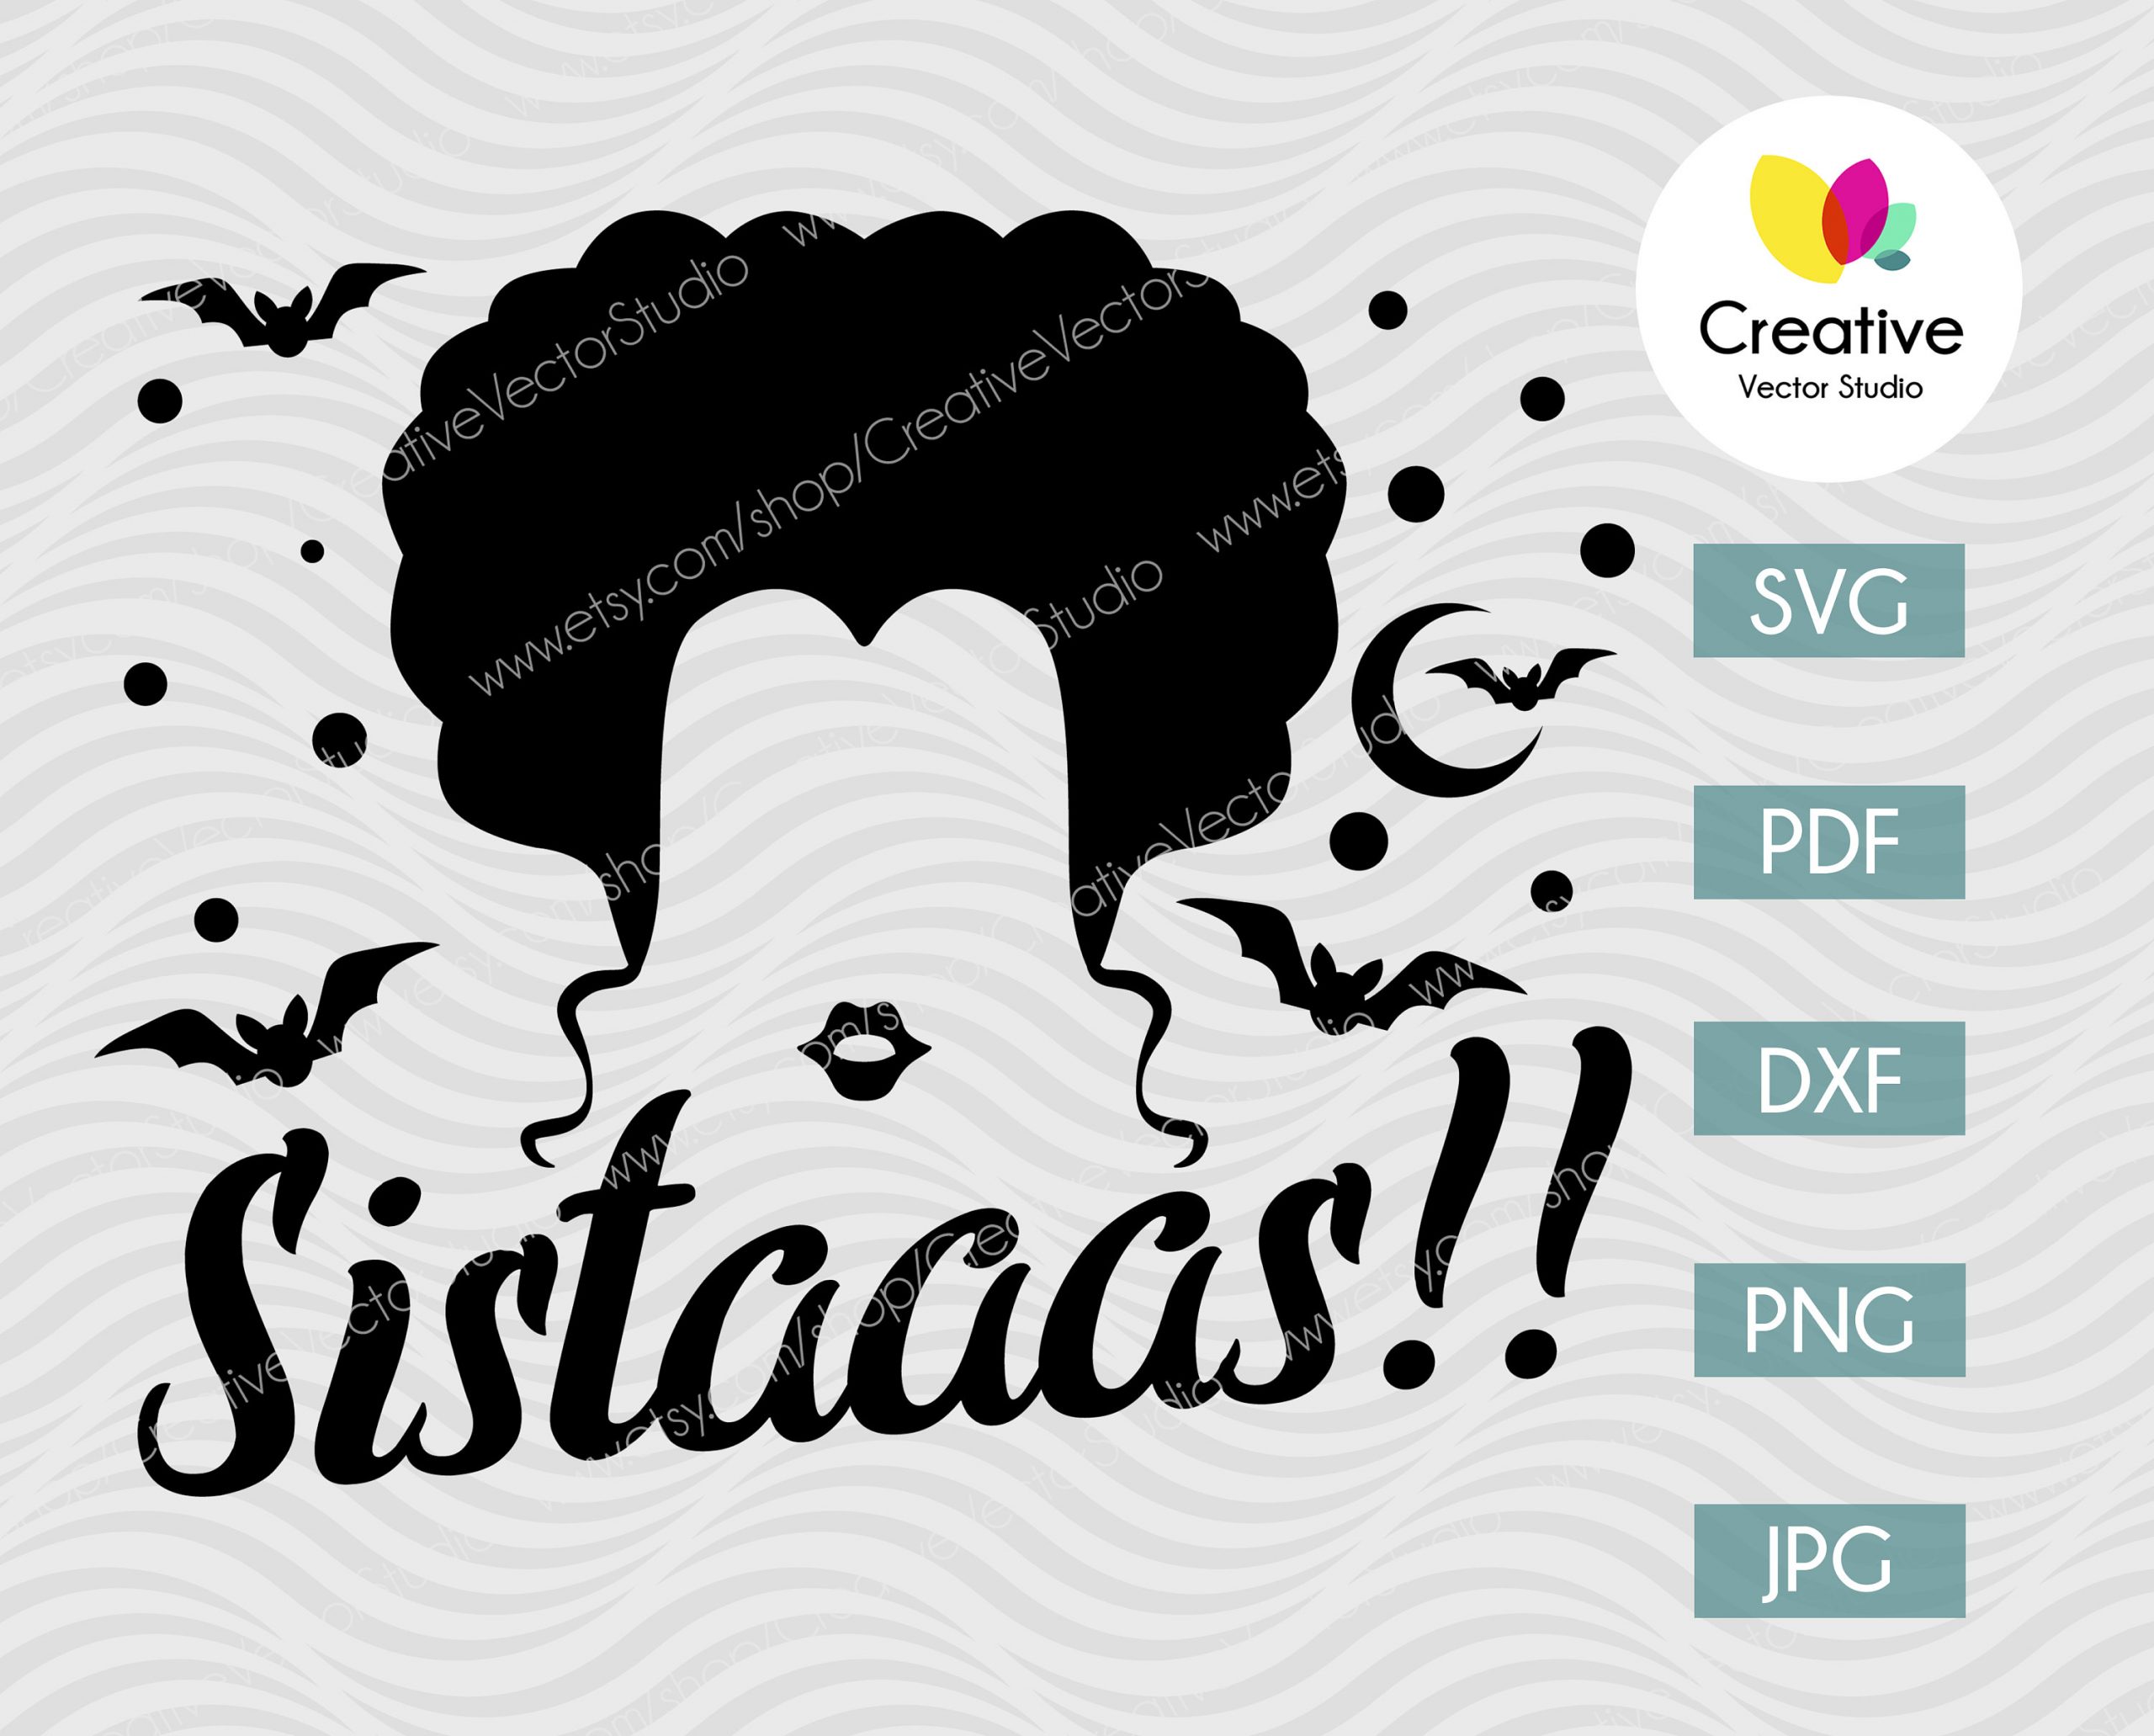 Hocus Pocus SVG, Winifred Sanderson svg vector print, Sistaaas!!, Witch